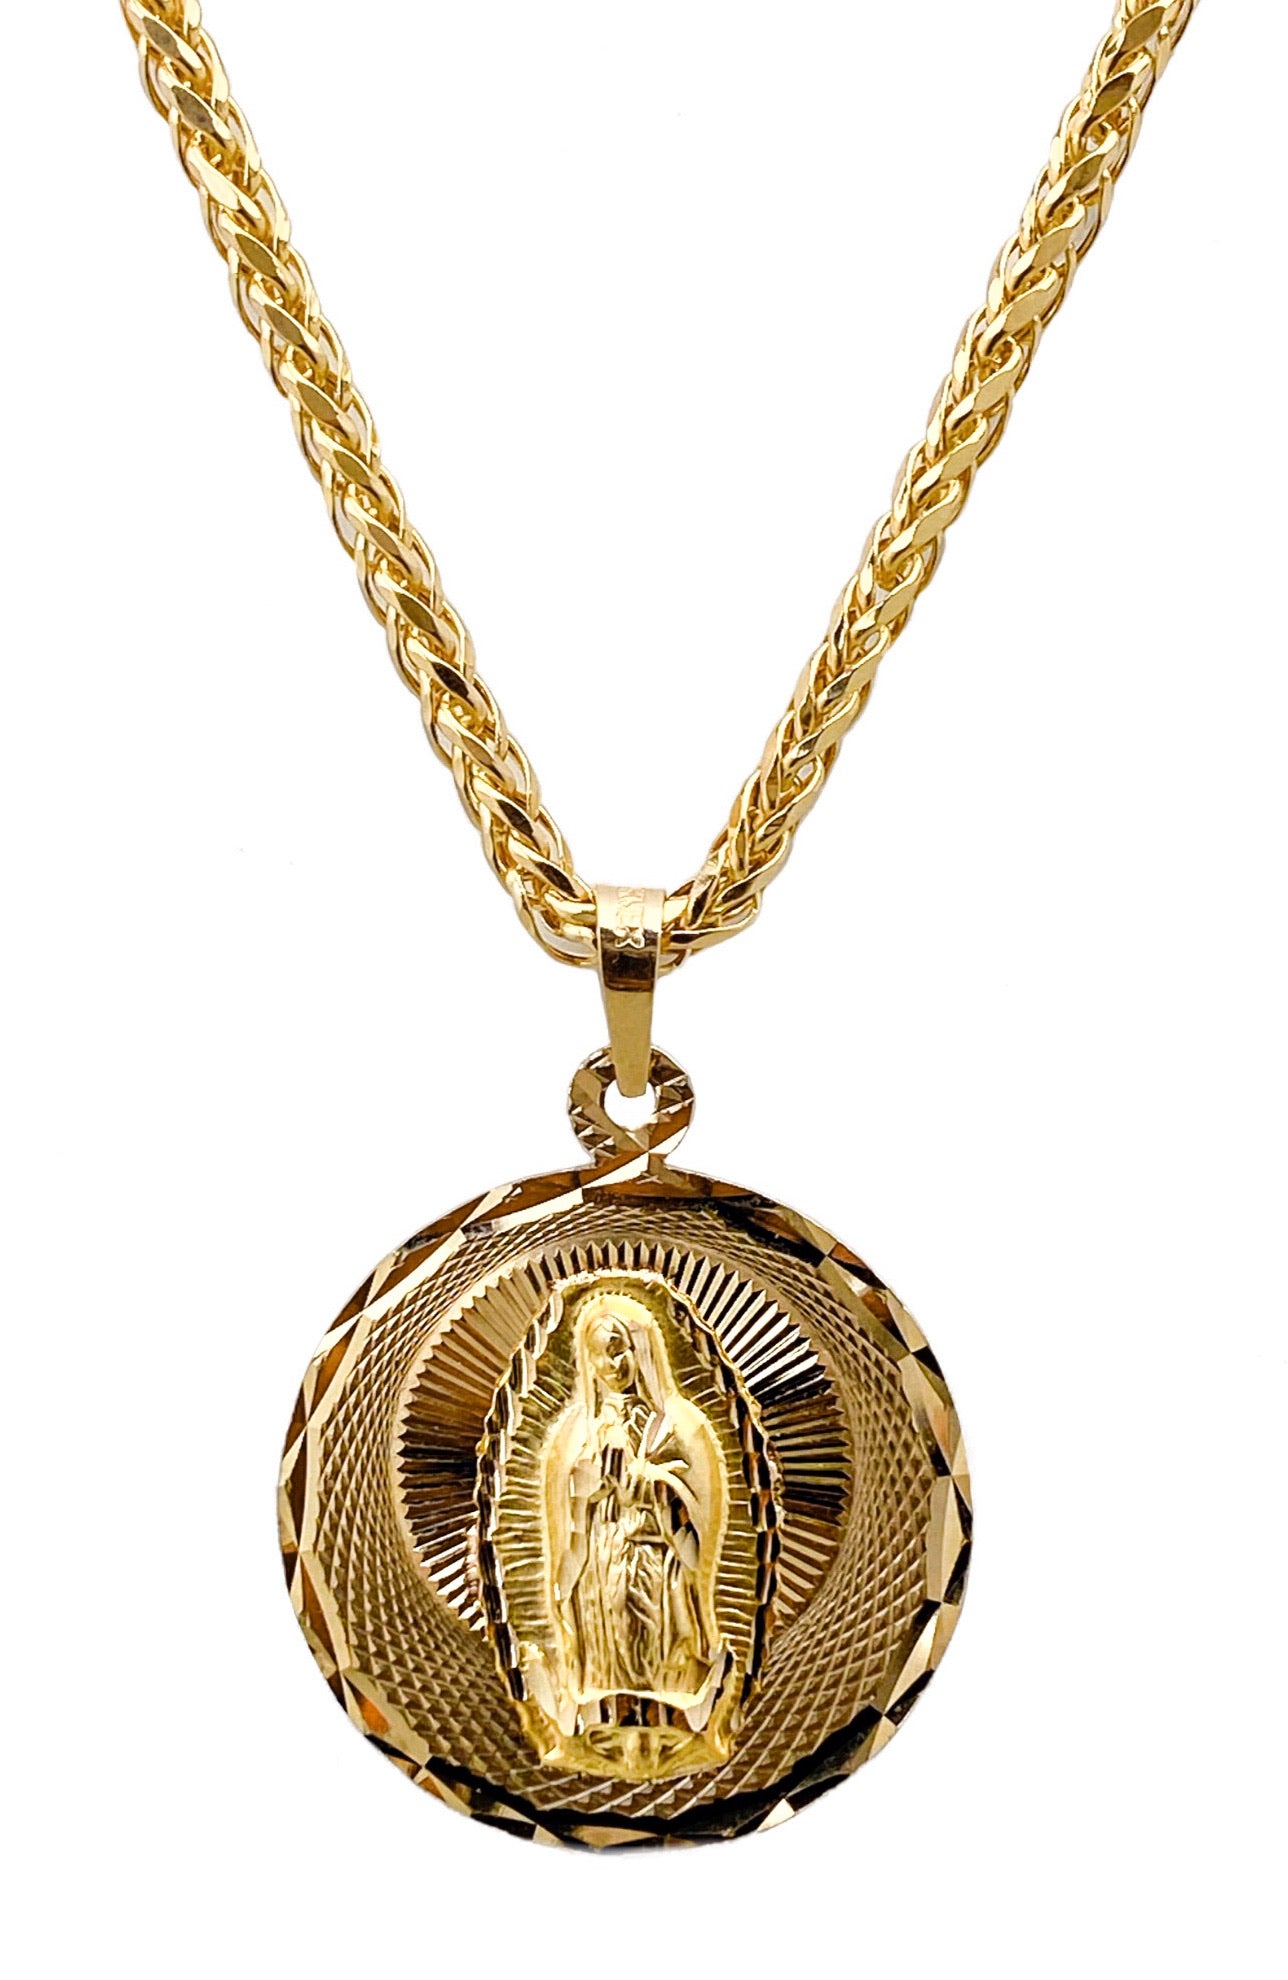 14K YELLOW GOLD LARGE VIRGIN MARY MEDALLION NECKLACE